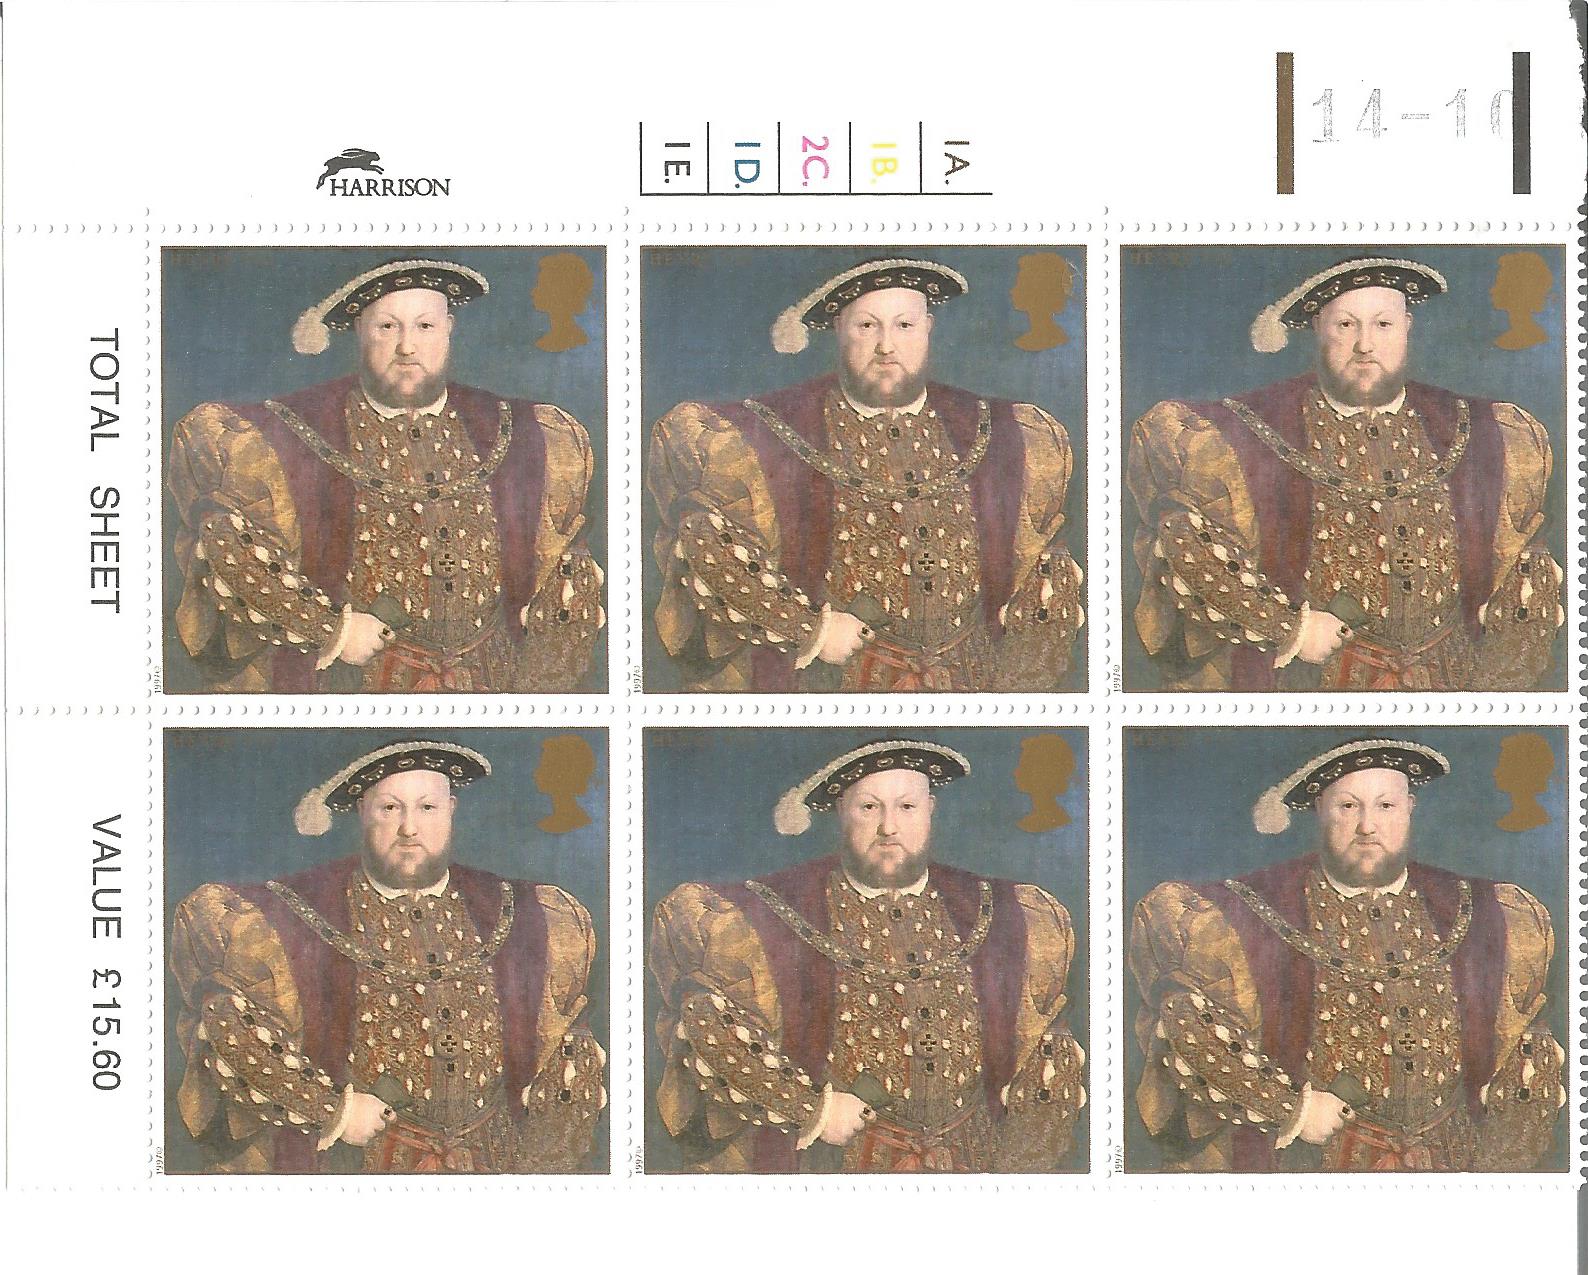 GB Mint Stamps £10+ face value Henry VIII The Great Tudor & The six Wives, Sheet of 36 Stamps (The - Image 2 of 2